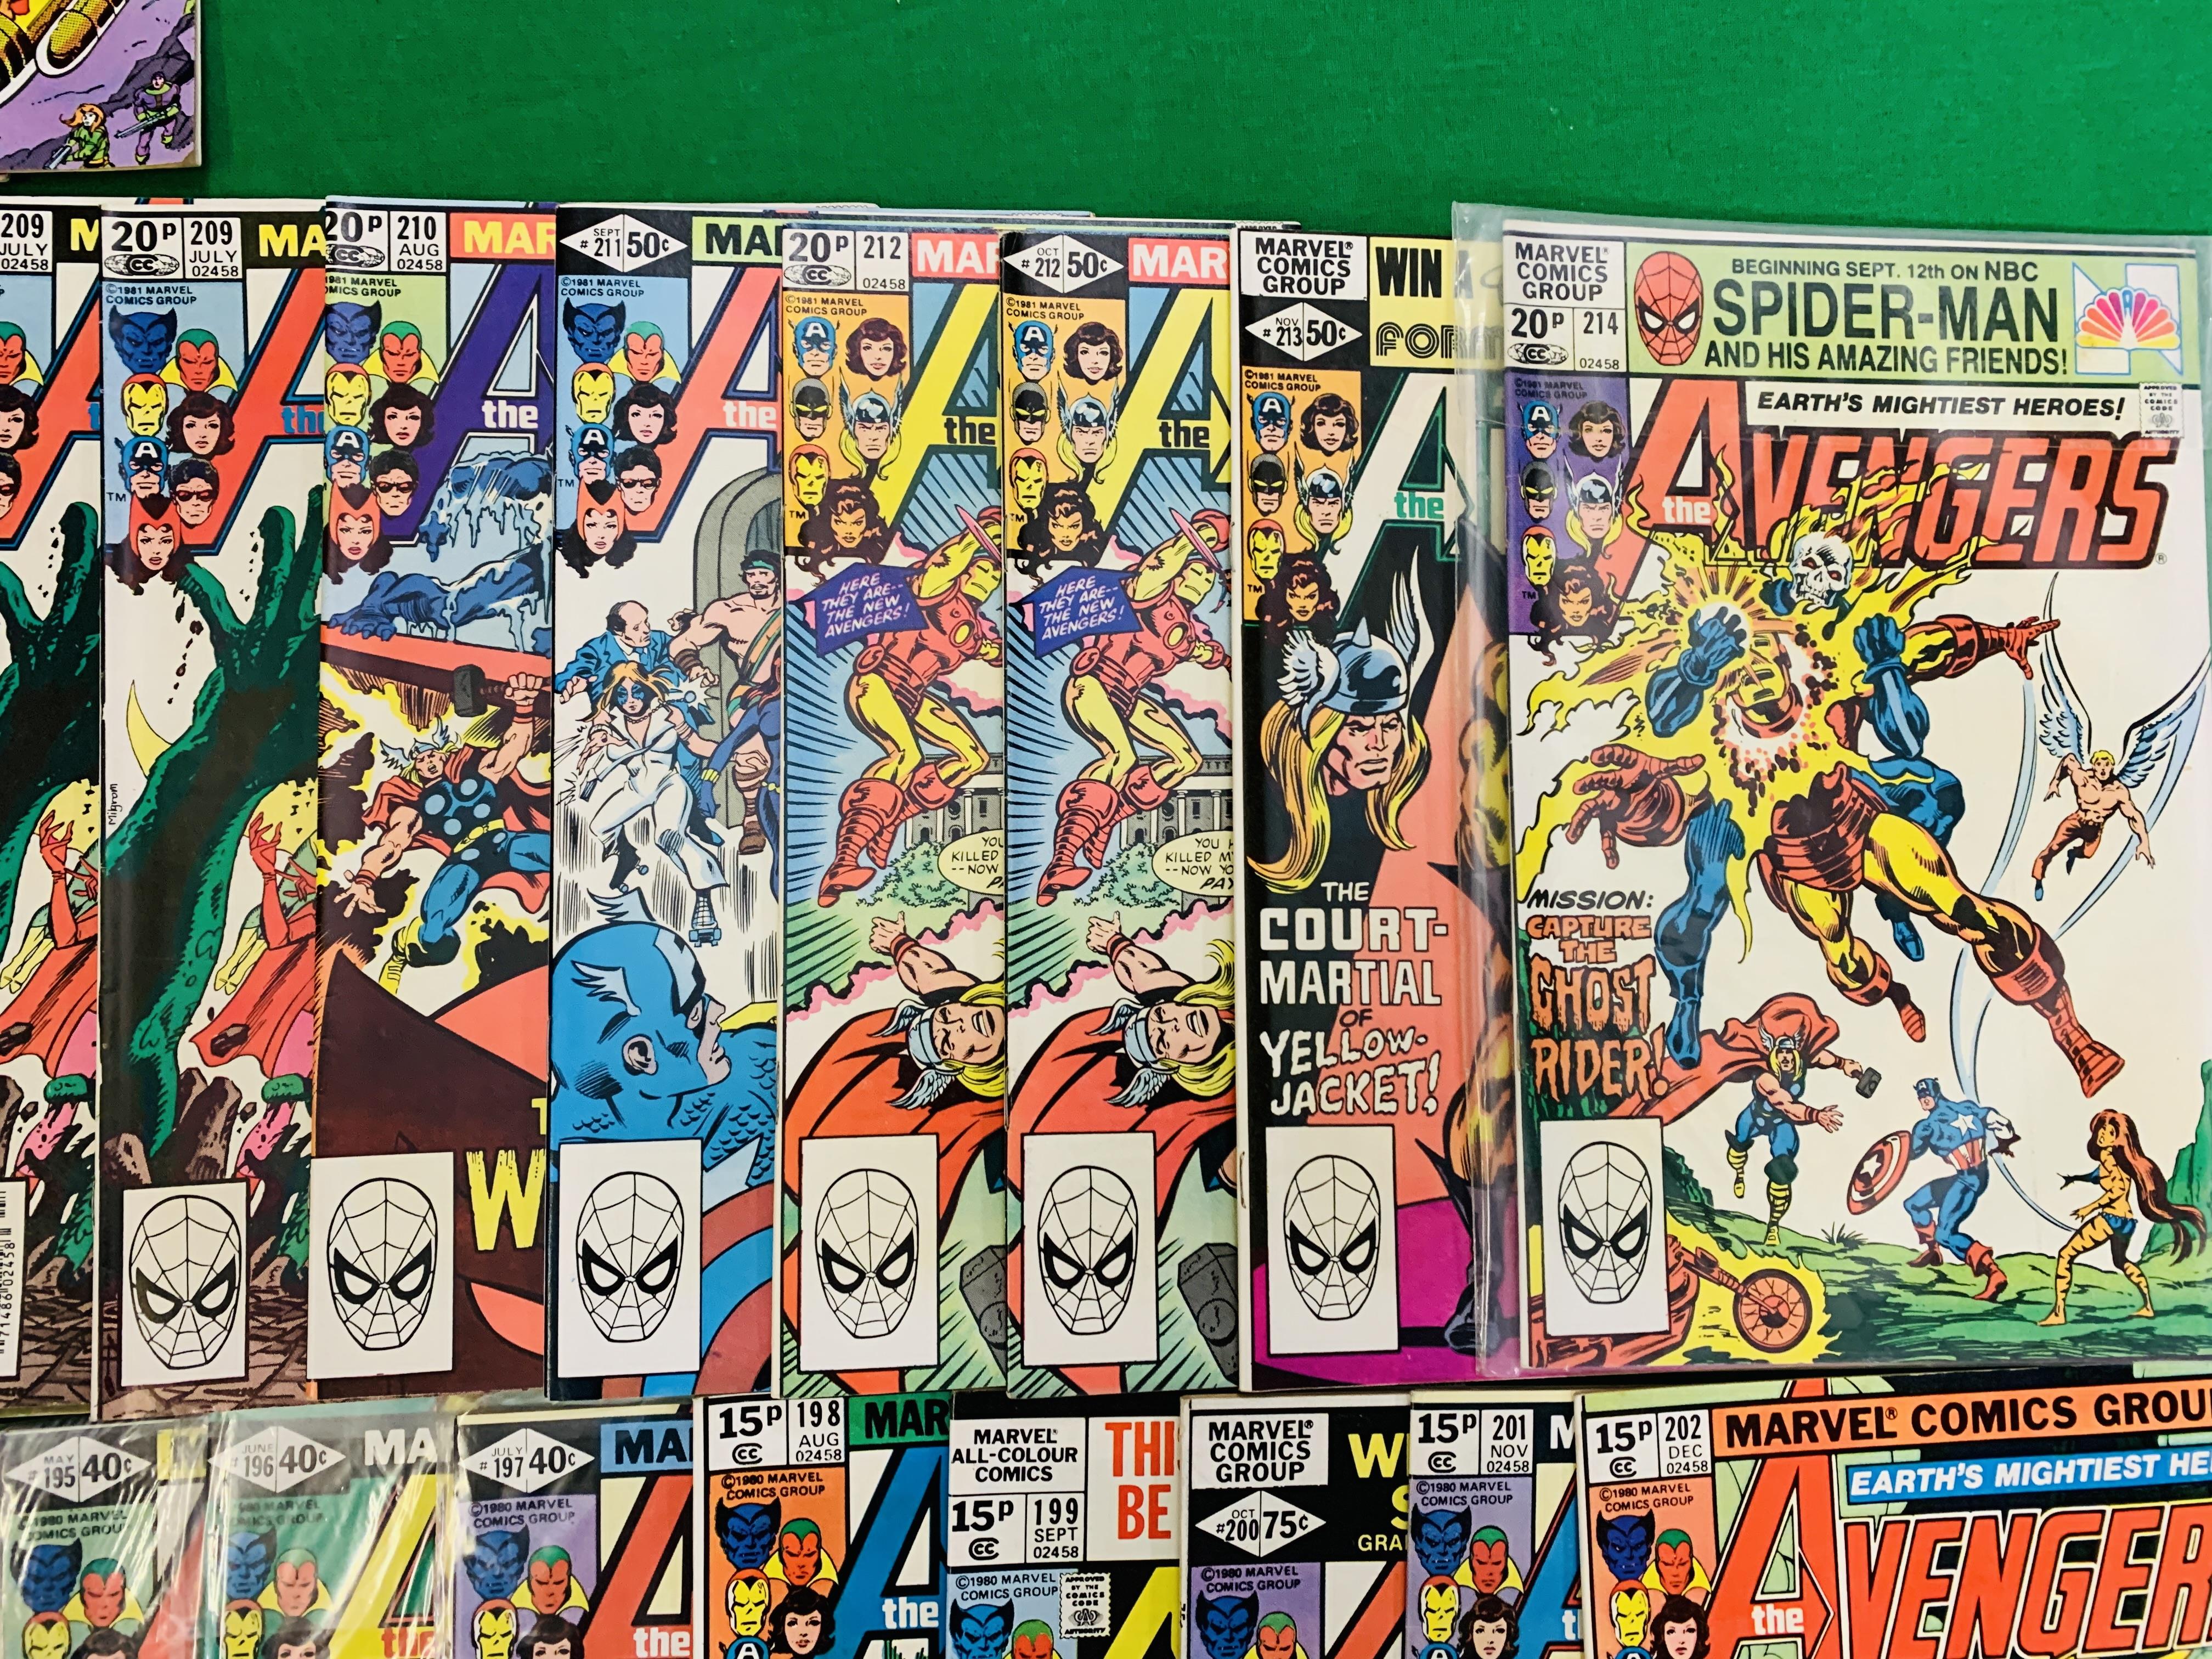 MARVEL COMICS THE AVENGERS NO. 101 - 299, MISSING ISSUES 103 AND 110. - Image 108 of 130